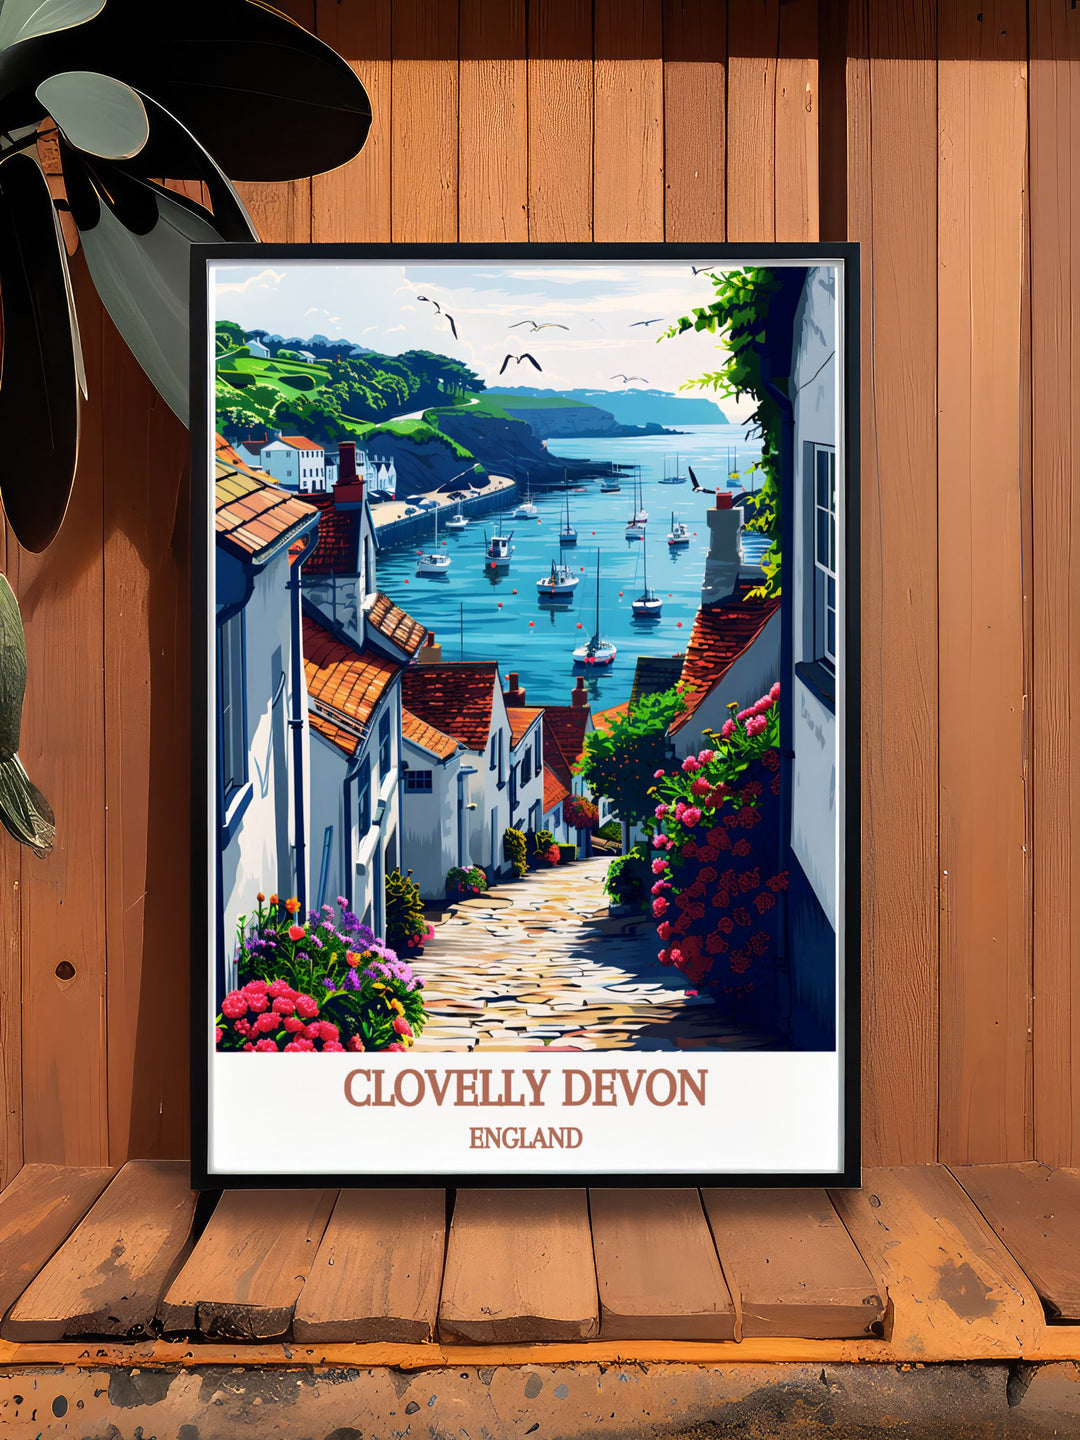 The historic harbour of Clovelly, where fishing boats have docked for generations, is a tranquil spot with a stone quay and sheltered bay perfect for relaxing and enjoying the views.